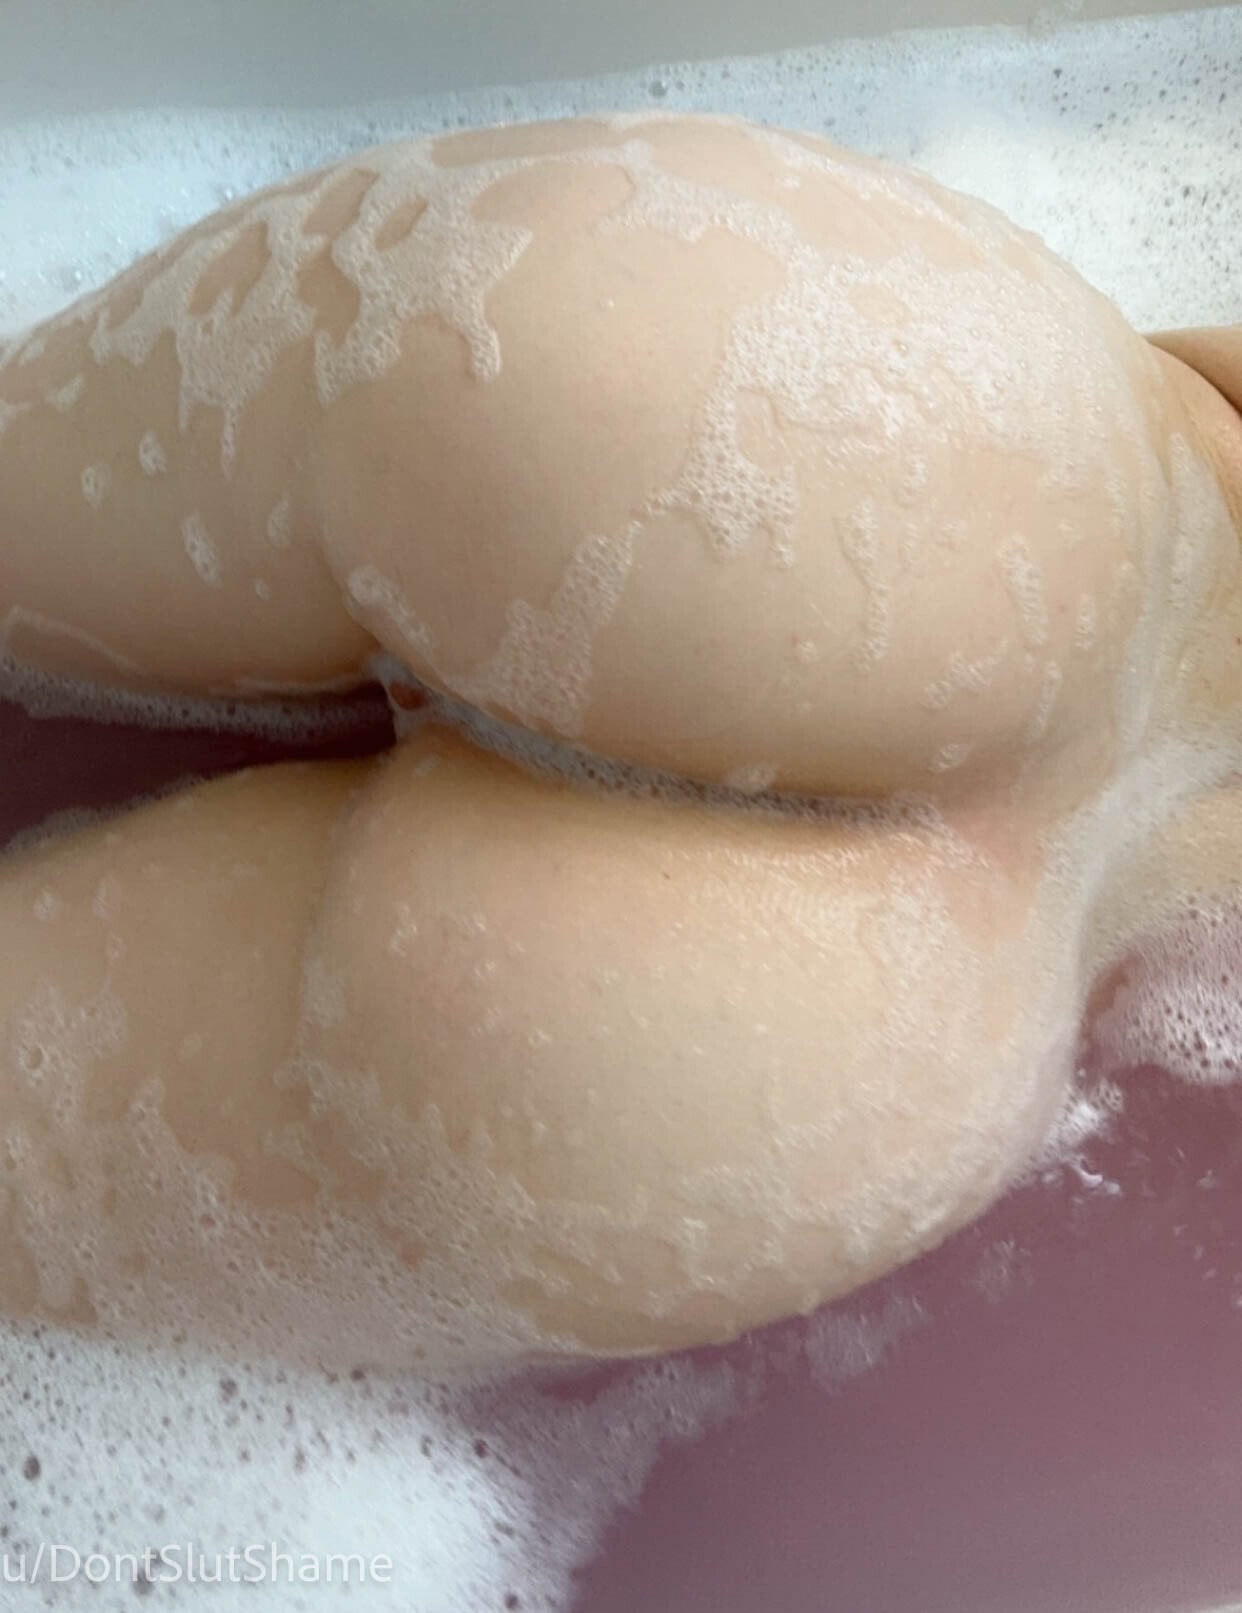 PAWG Help me rinse off these suds real quick